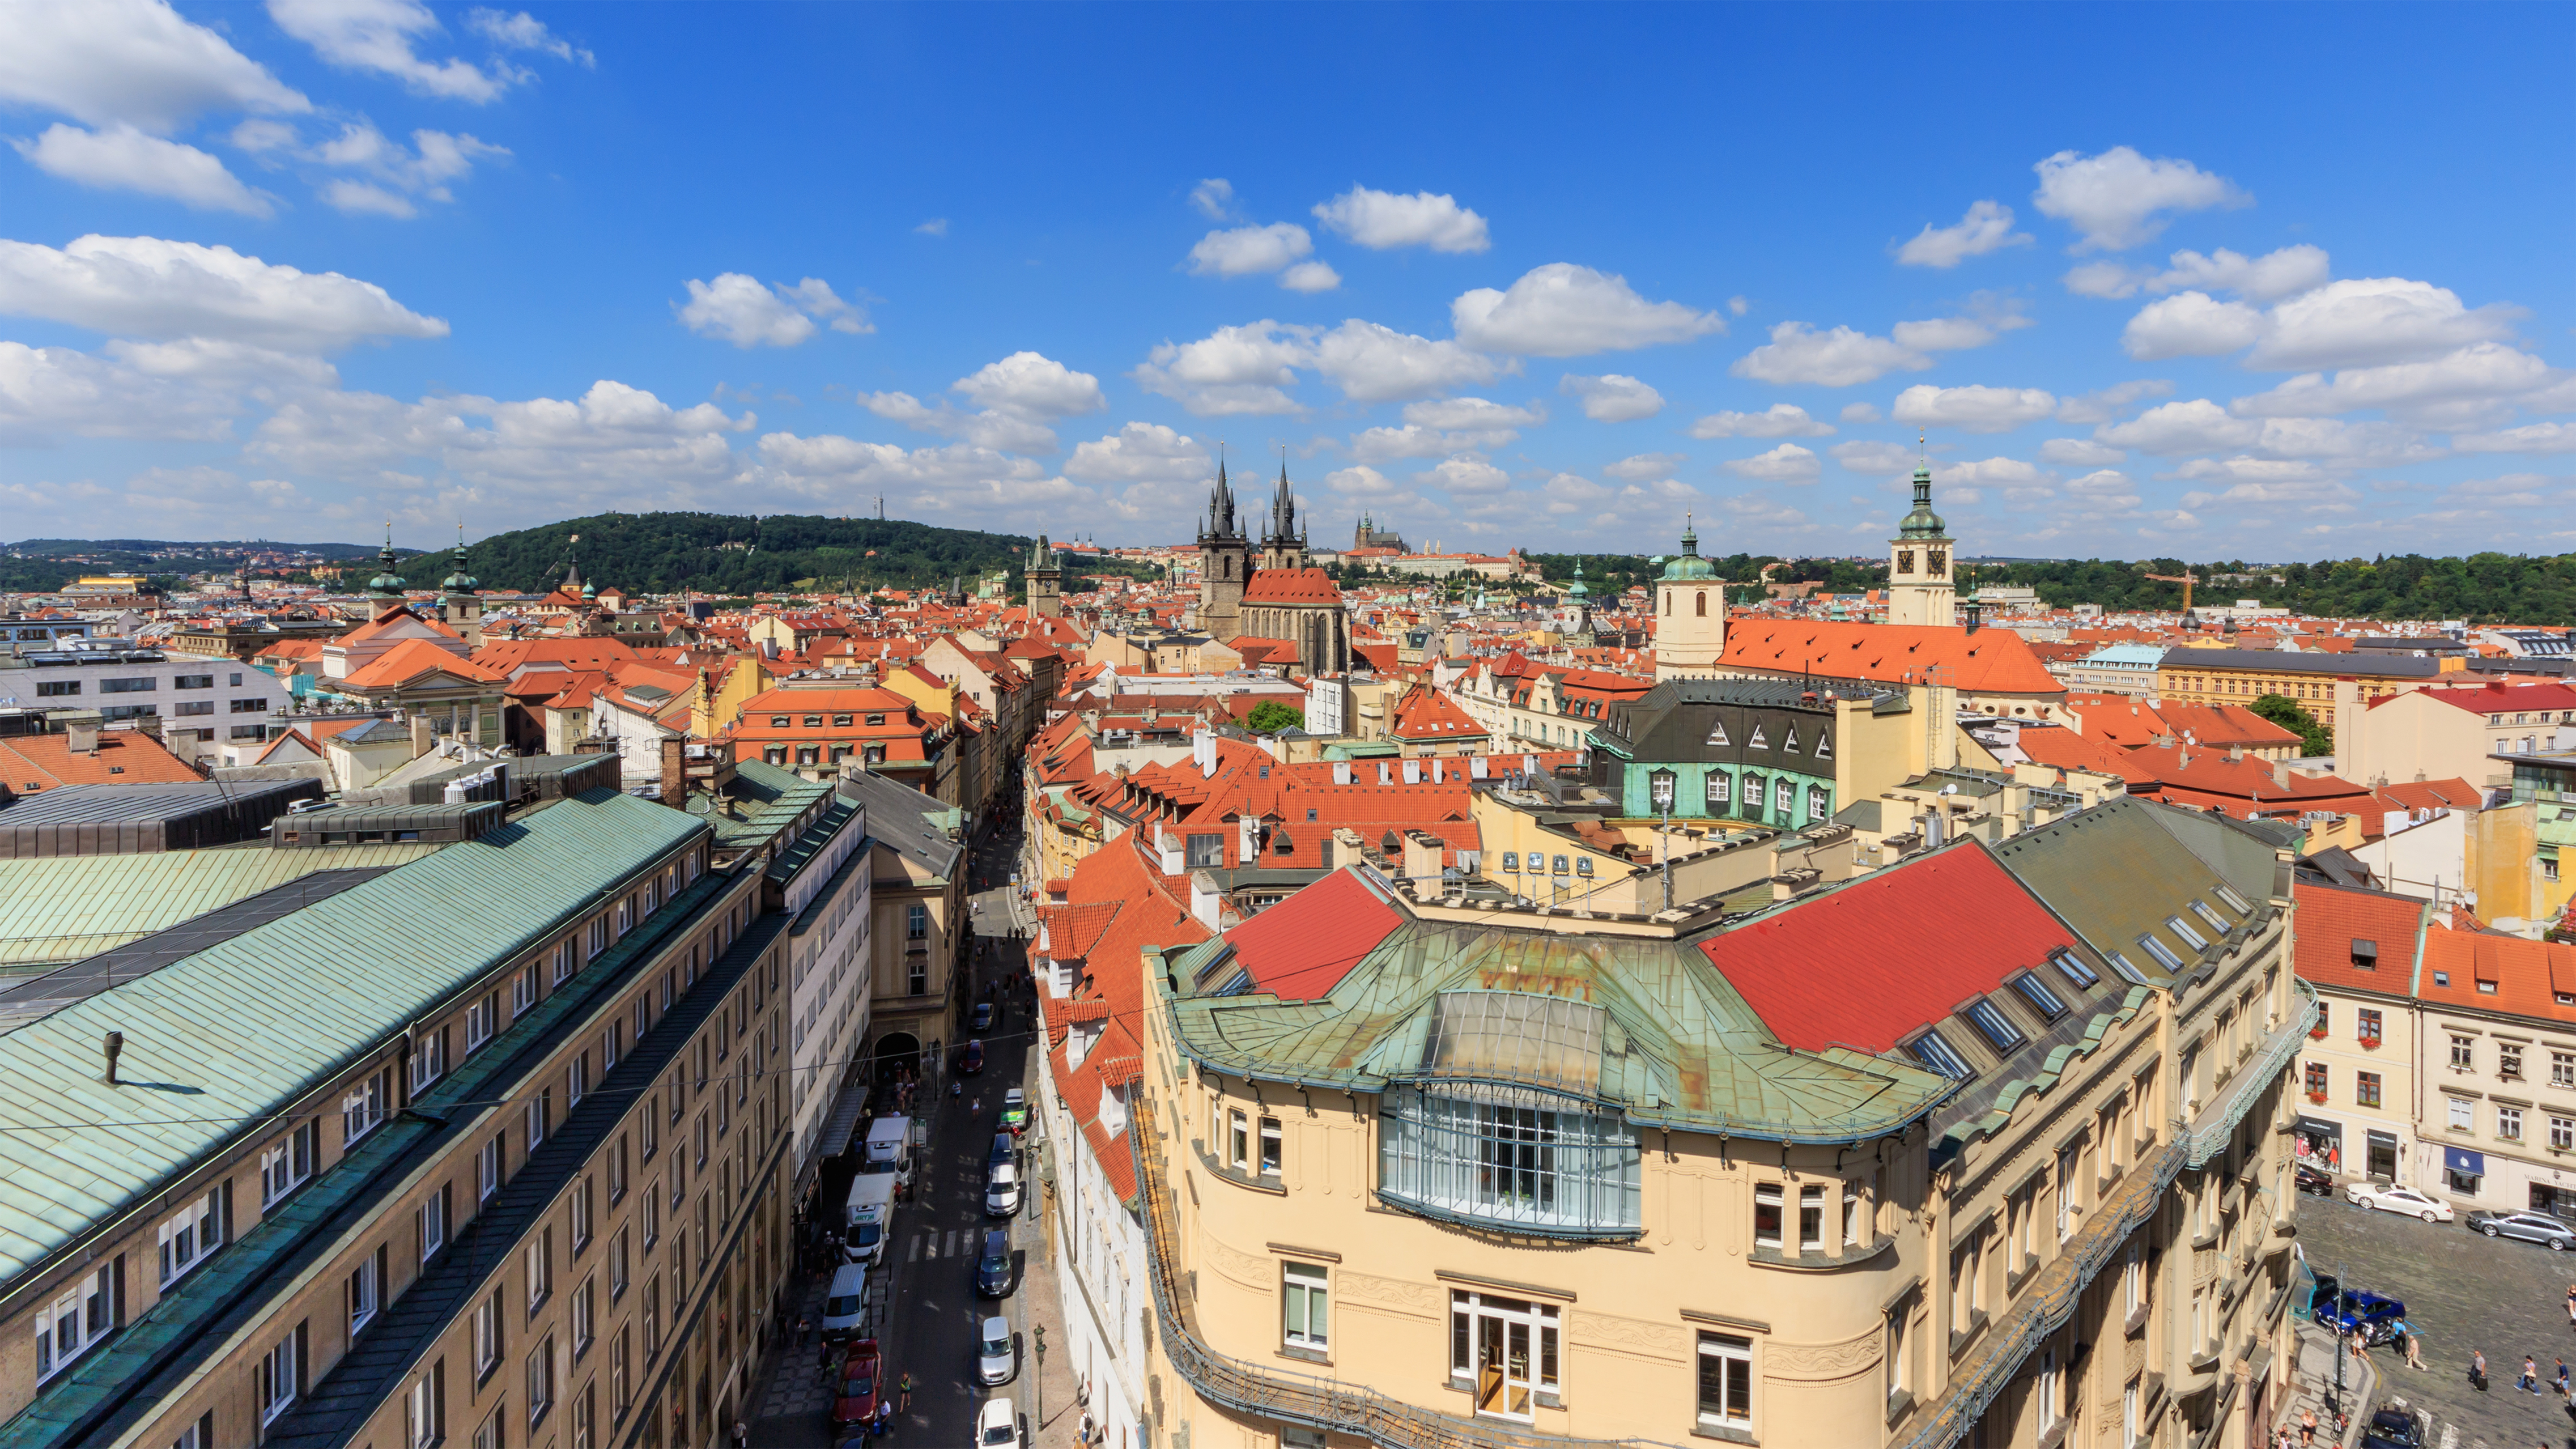 Prague 07-2016 View from Powder Tower img1